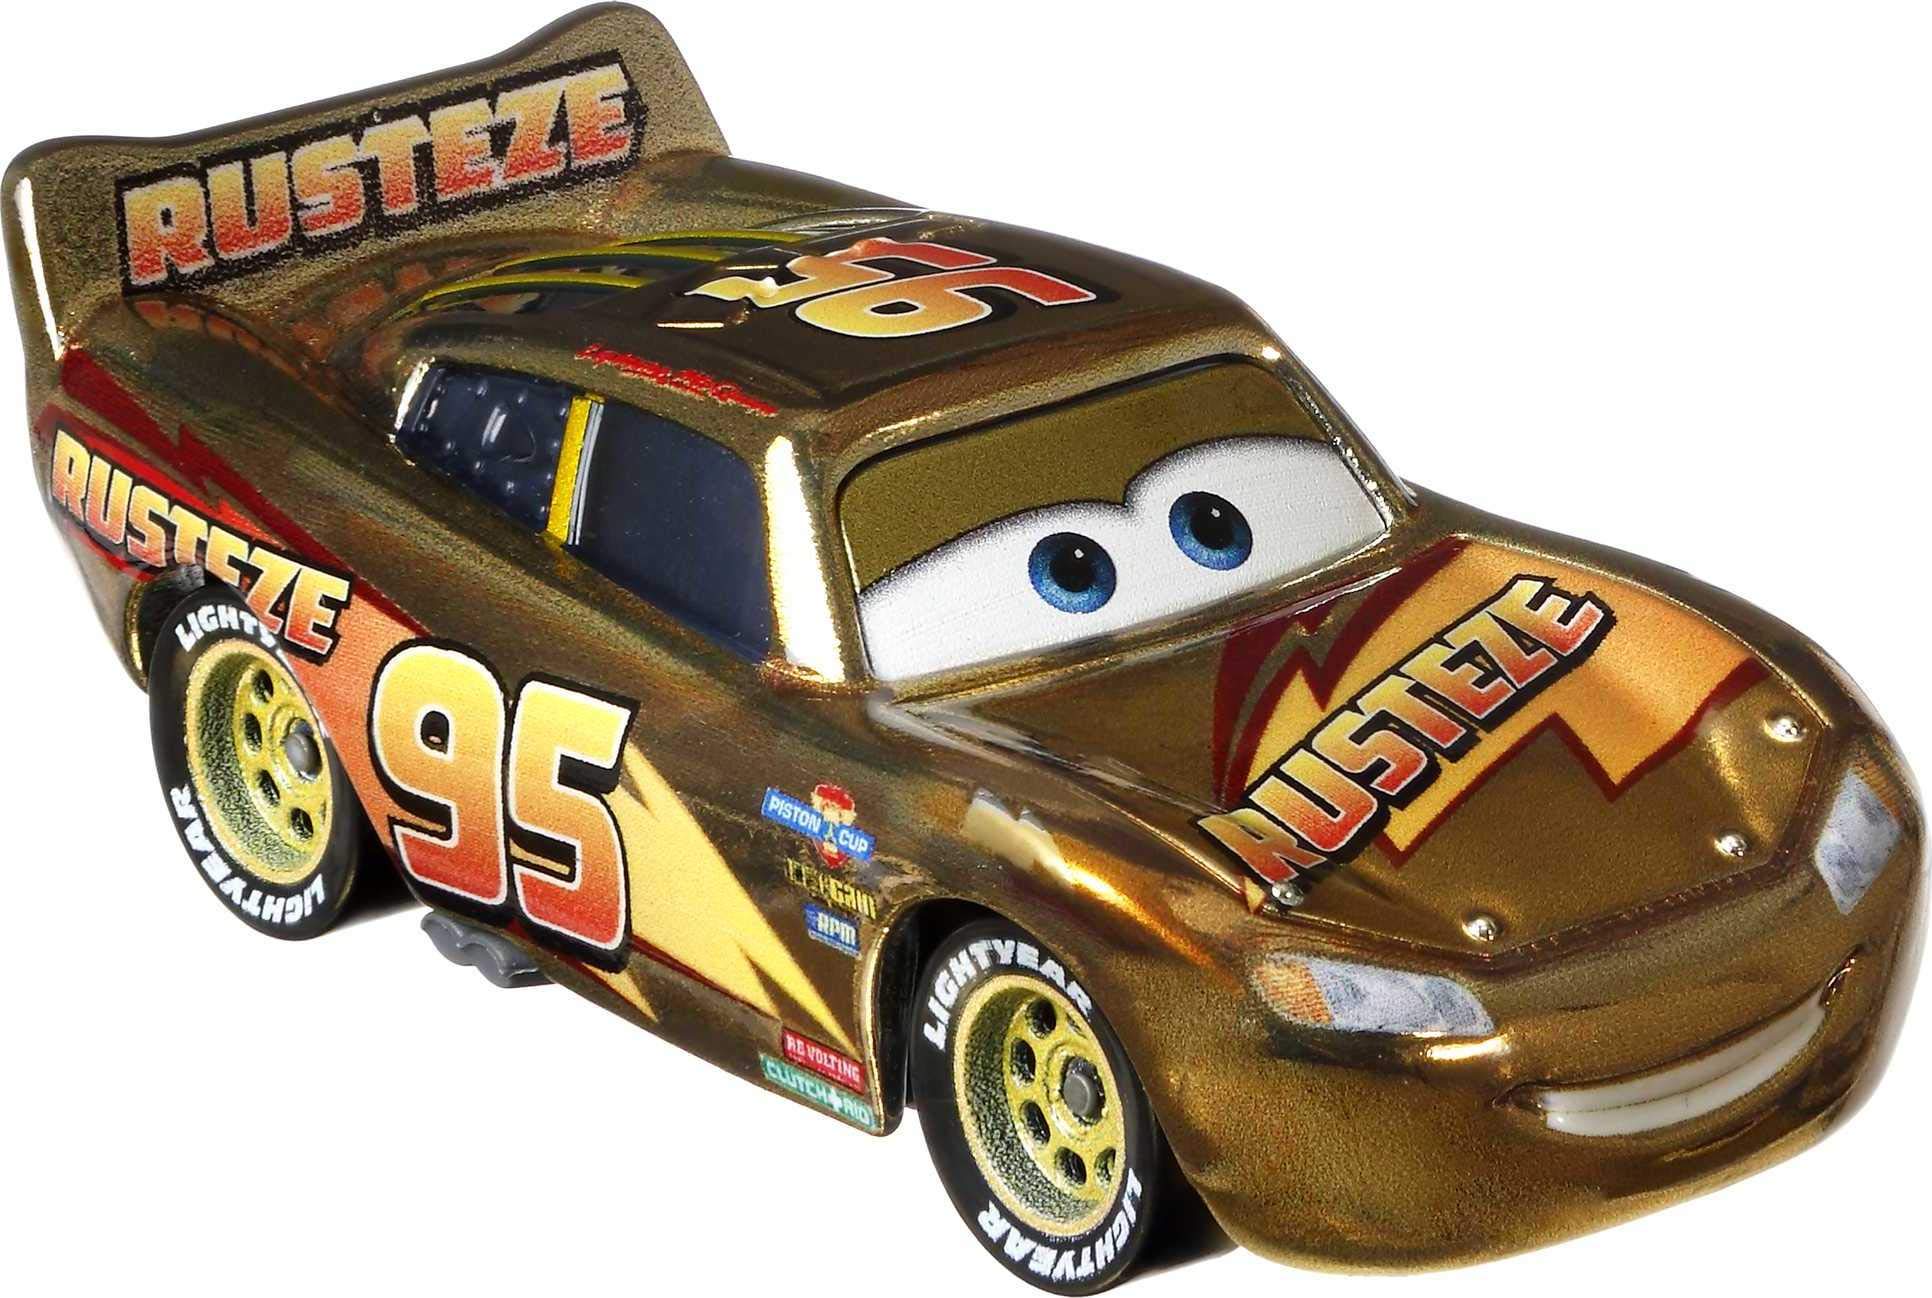 Disney cars golden Die-cast Lightning McQueen 1:55Scale Movie character for Racing and Storytelling Fun, gift for Kids Age 3 Yea